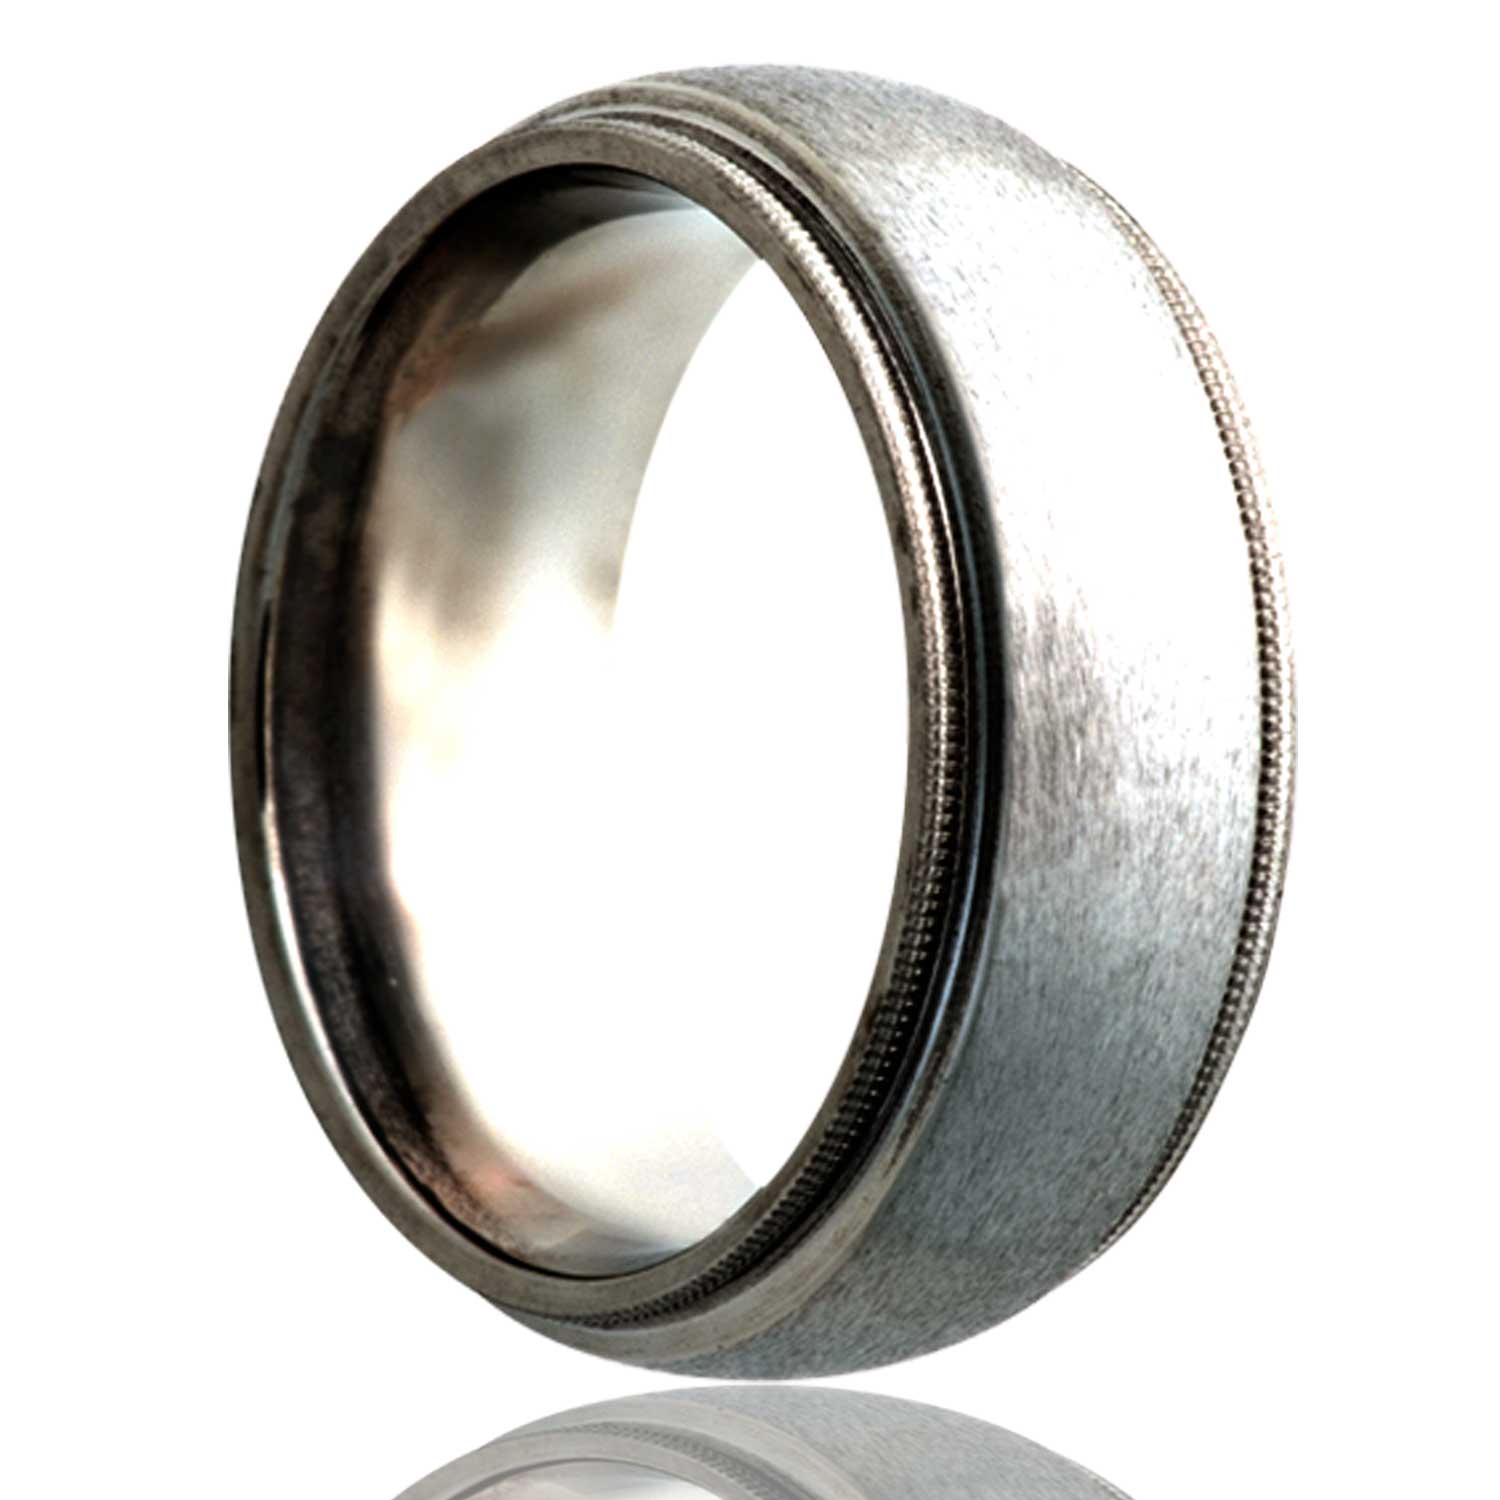 A domed satin finish titanium wedding band with stepped edges displayed on a neutral white background.